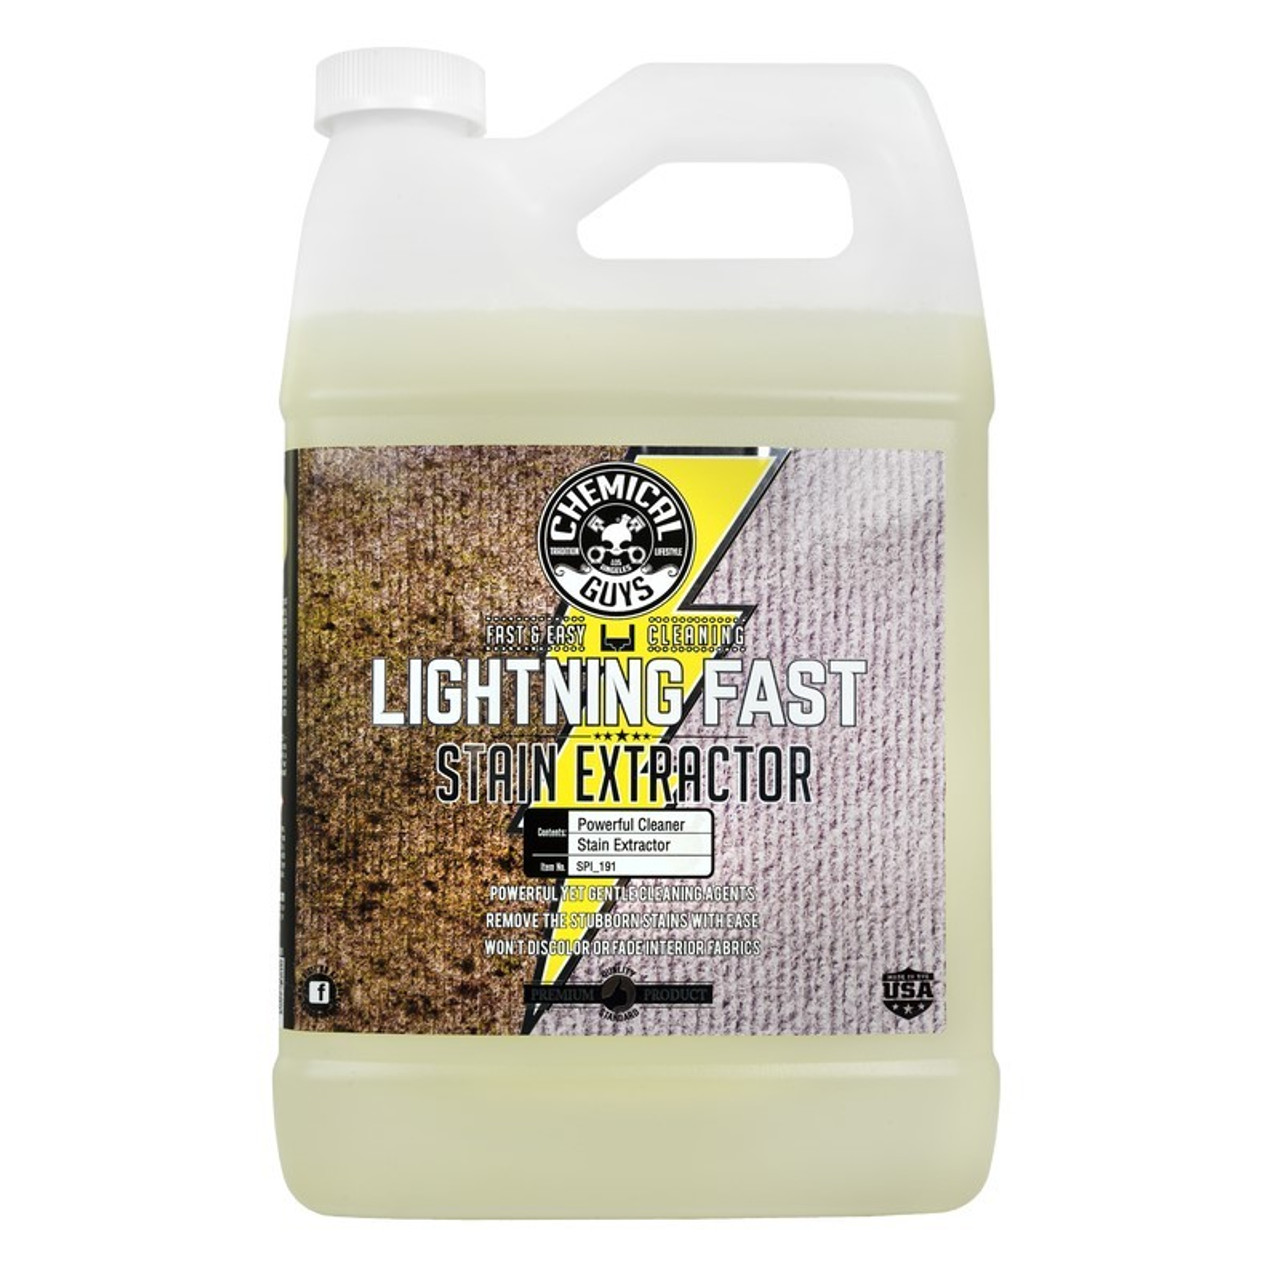 NEW PRODUCT ALERT! - How To QUICKLY Maintain Your Interior With All New Chemical  Guys WIPES! 